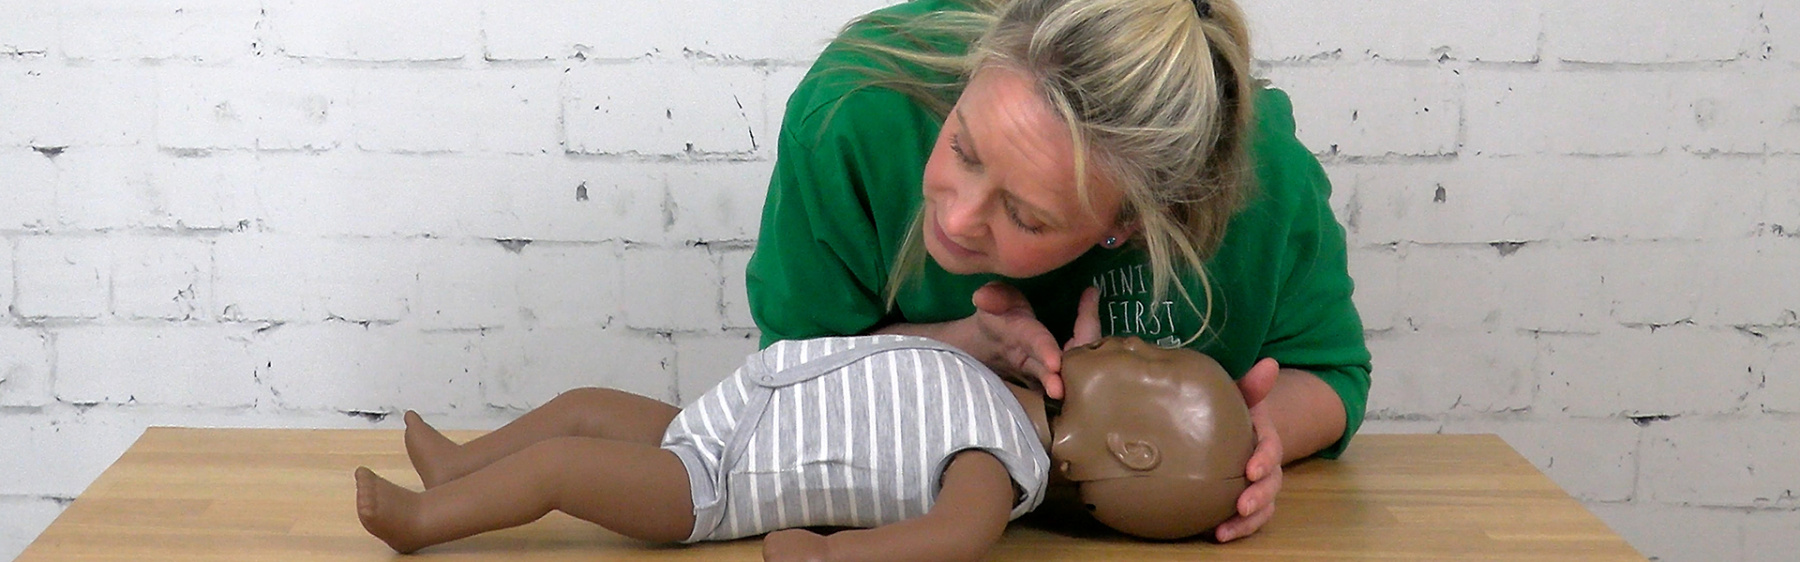 A person checking a baby doll for a heartbeat